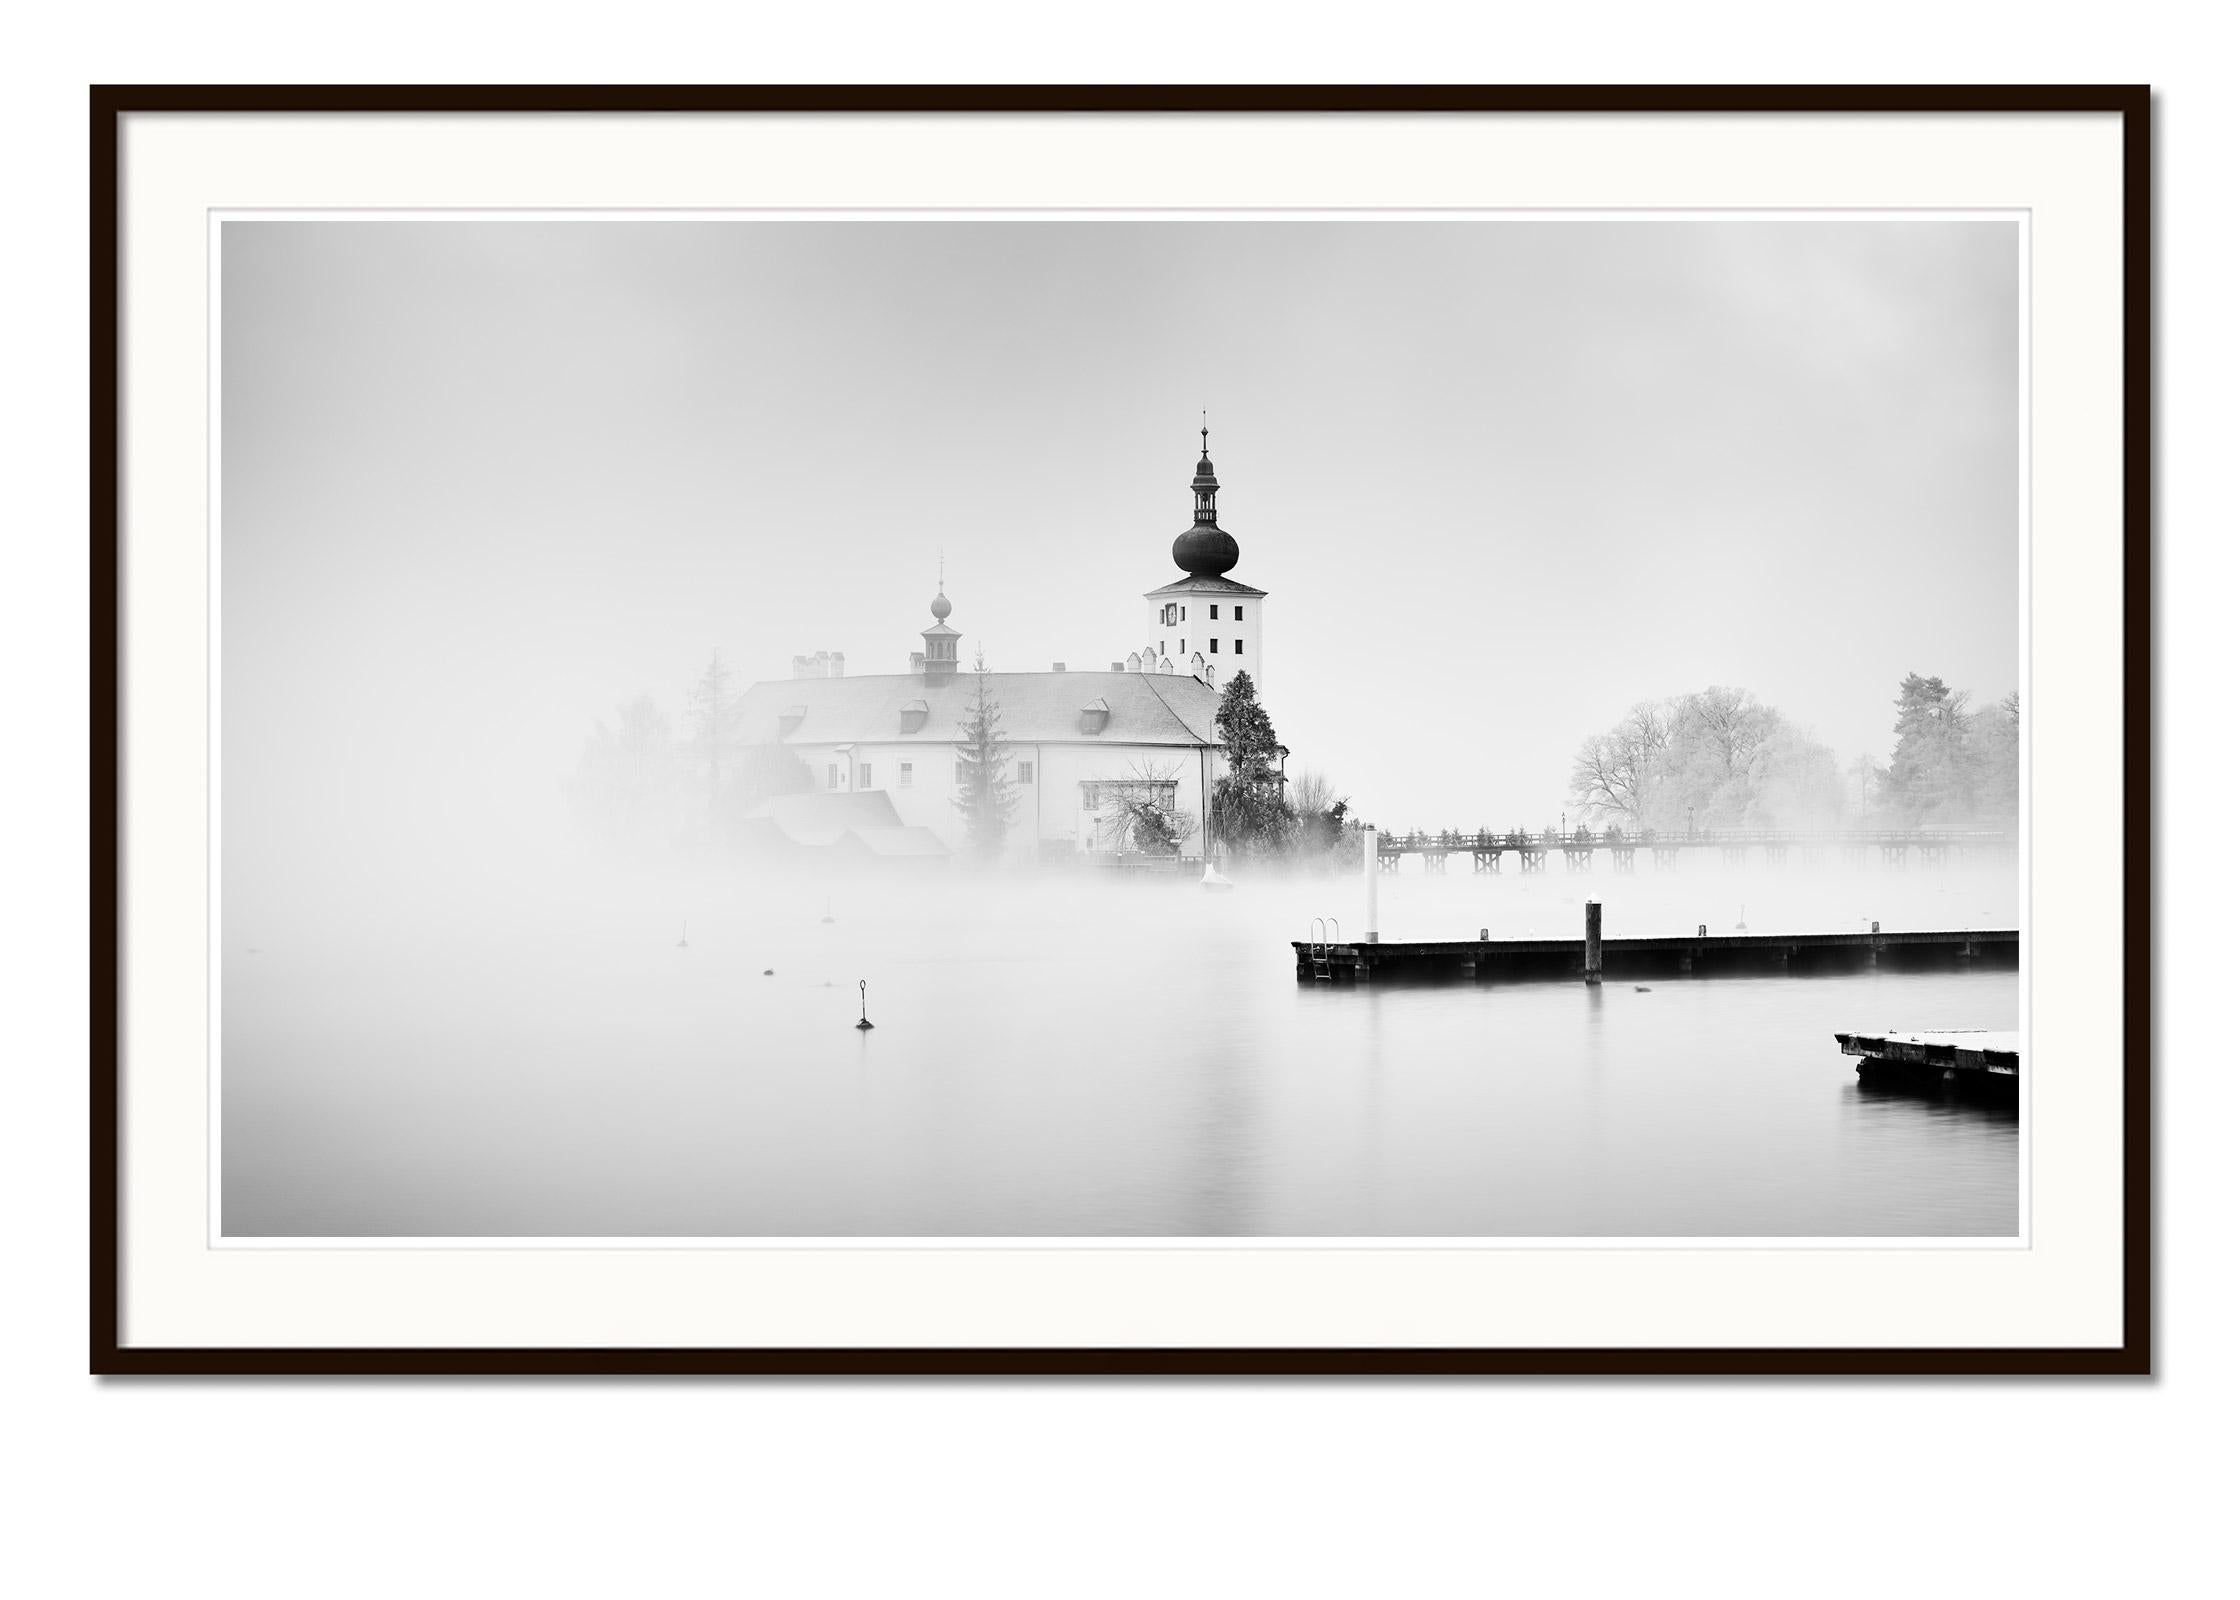 Seeschloss Ort Austria black and white long exposure waterscape art photography - Gray Landscape Photograph by Gerald Berghammer